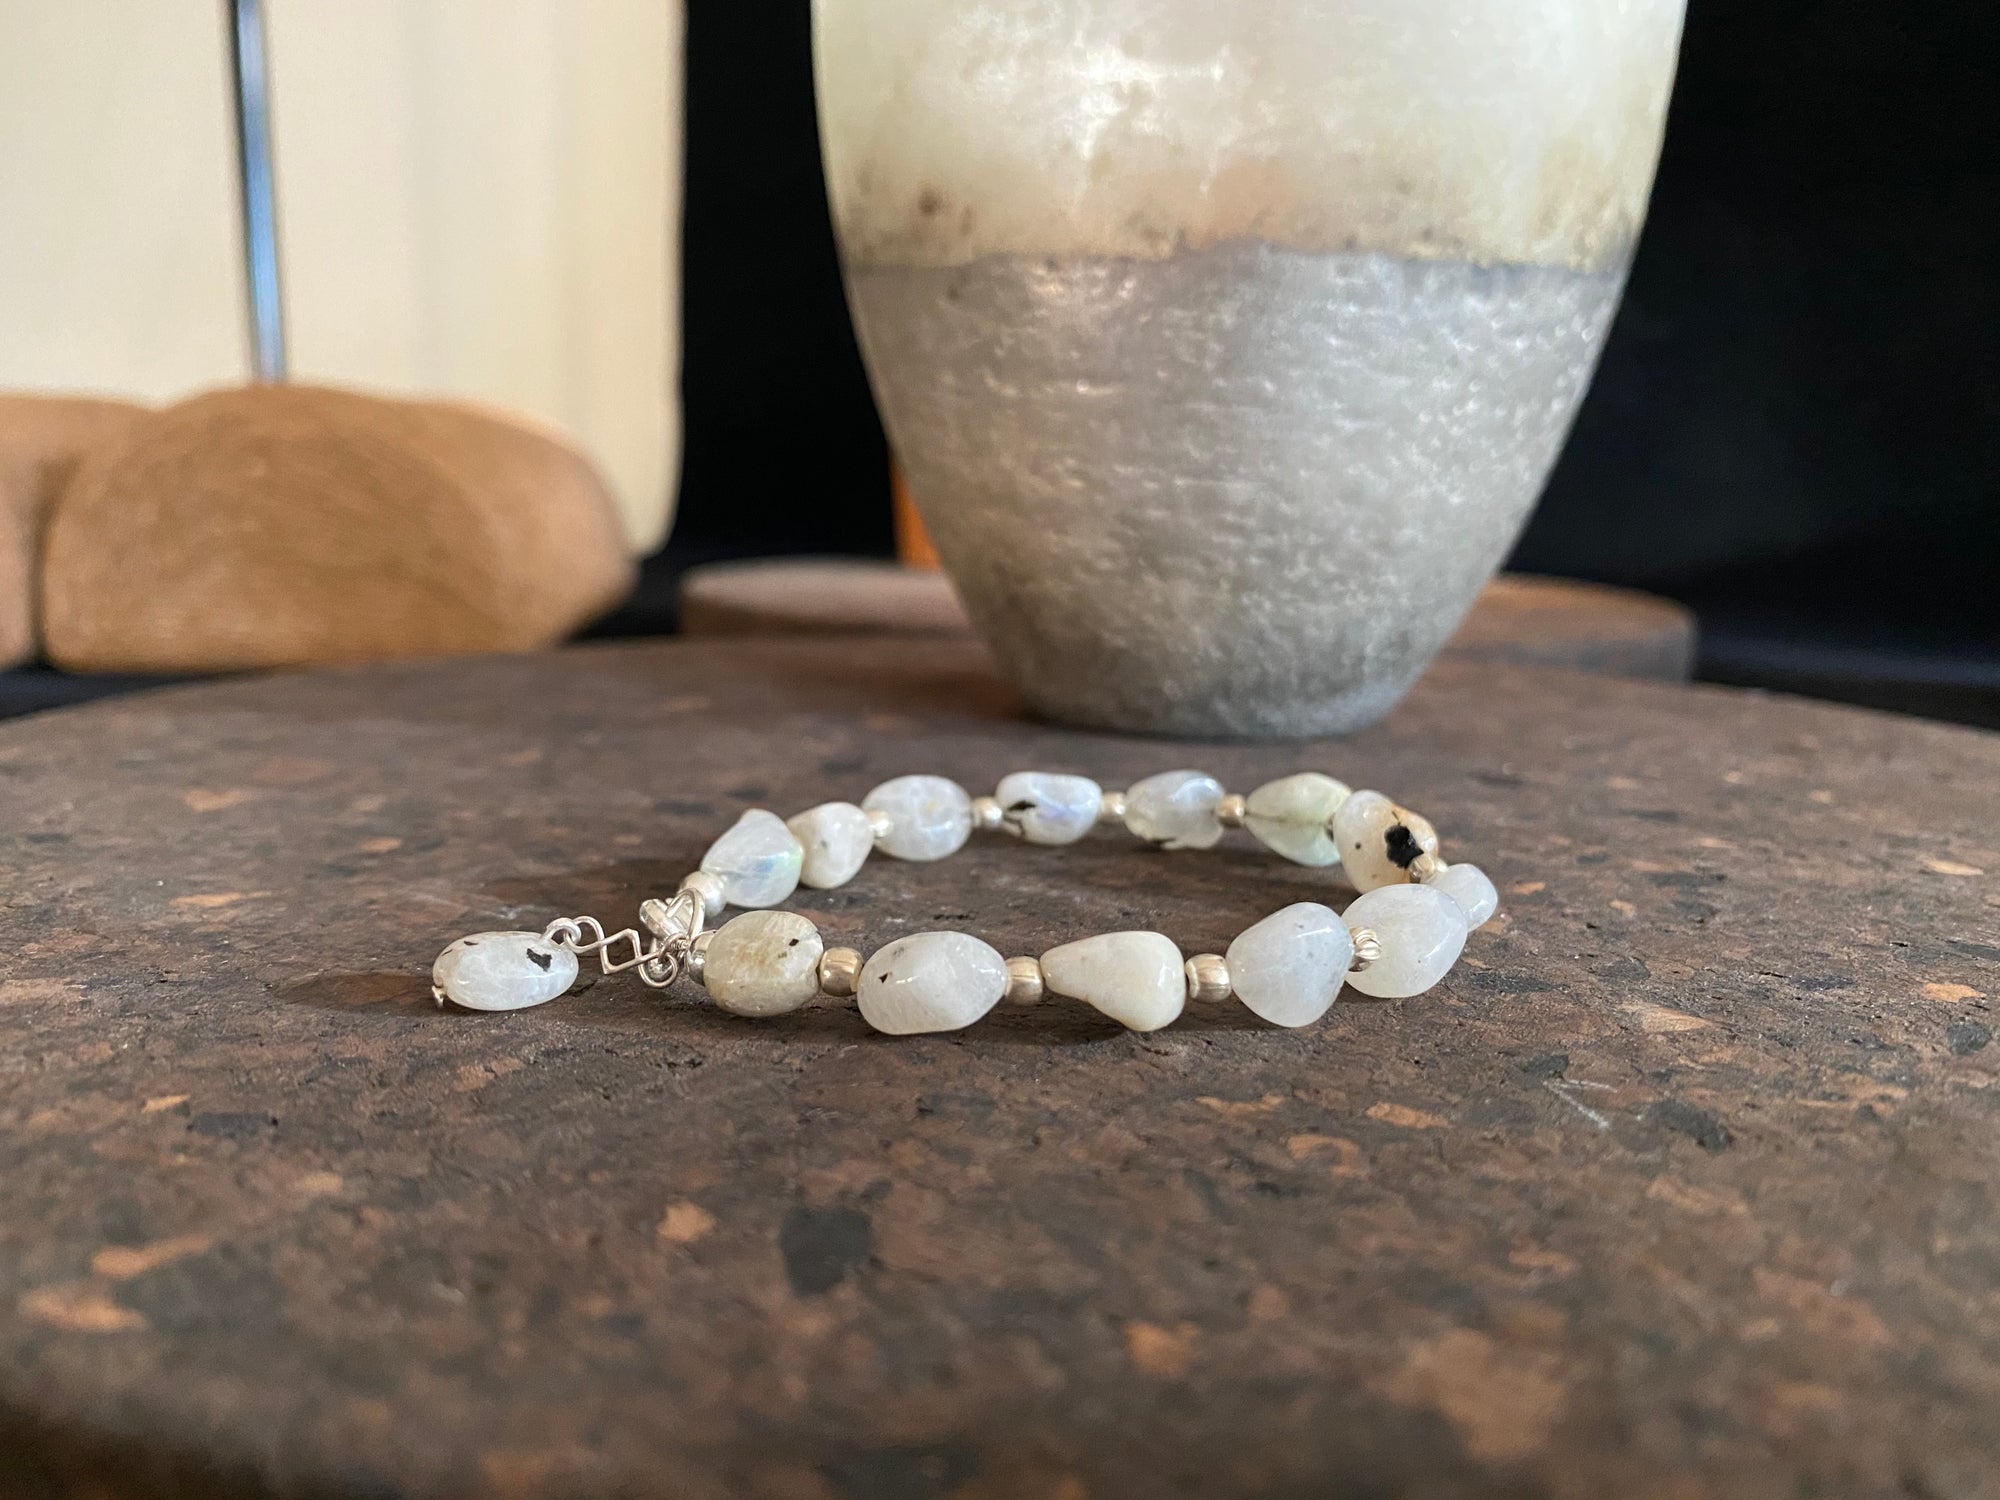 Boho style bracelet made from natural rainbow moonstone stones, finished with sterling silver. A single moonstone drop acts as both a feature to catch the eye and as a counterweight, keeping the bracelet sitting the right way up on the wrist.  18.5 cm length (7.3")